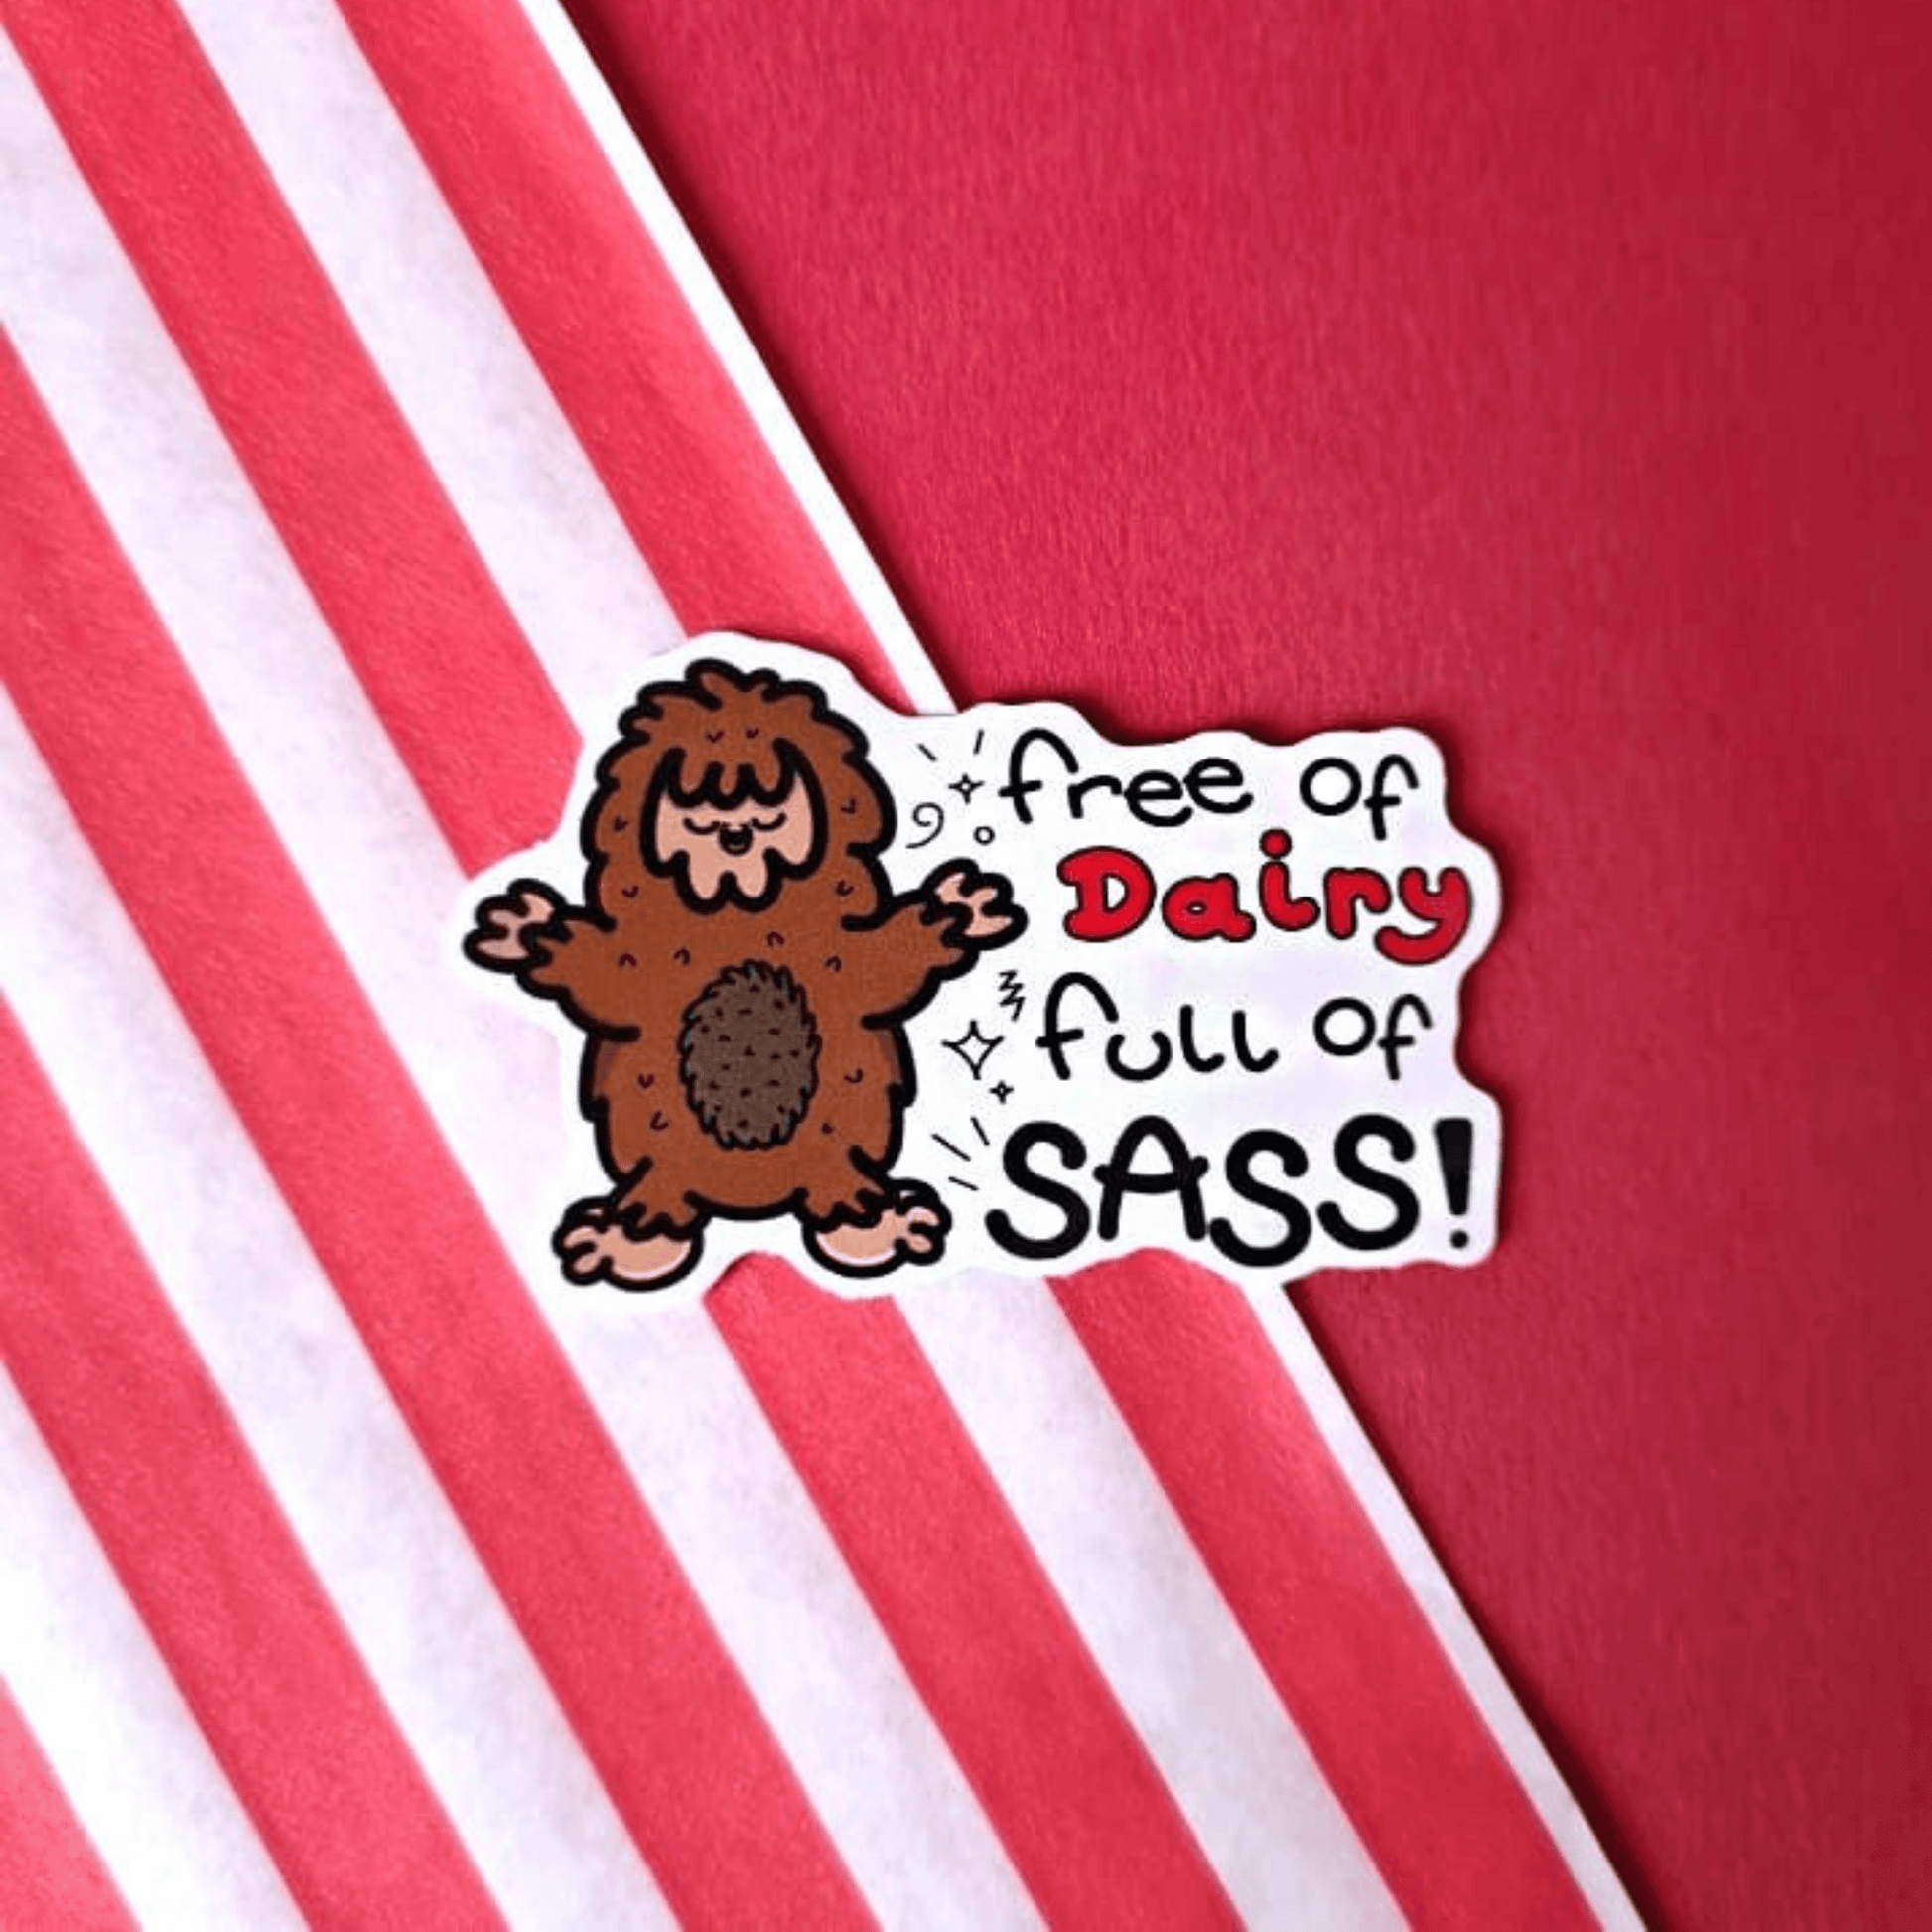 The Free of Dairy, Full of Sass! Sticker - Lactose Intolerant on a red background with a red stripe candy bag. The sticker features a smiling cheering brown sasquatch with black sparkles and text reading 'free of dairy full of sass!'. The design was created to raise awareness for lactose intolerance.